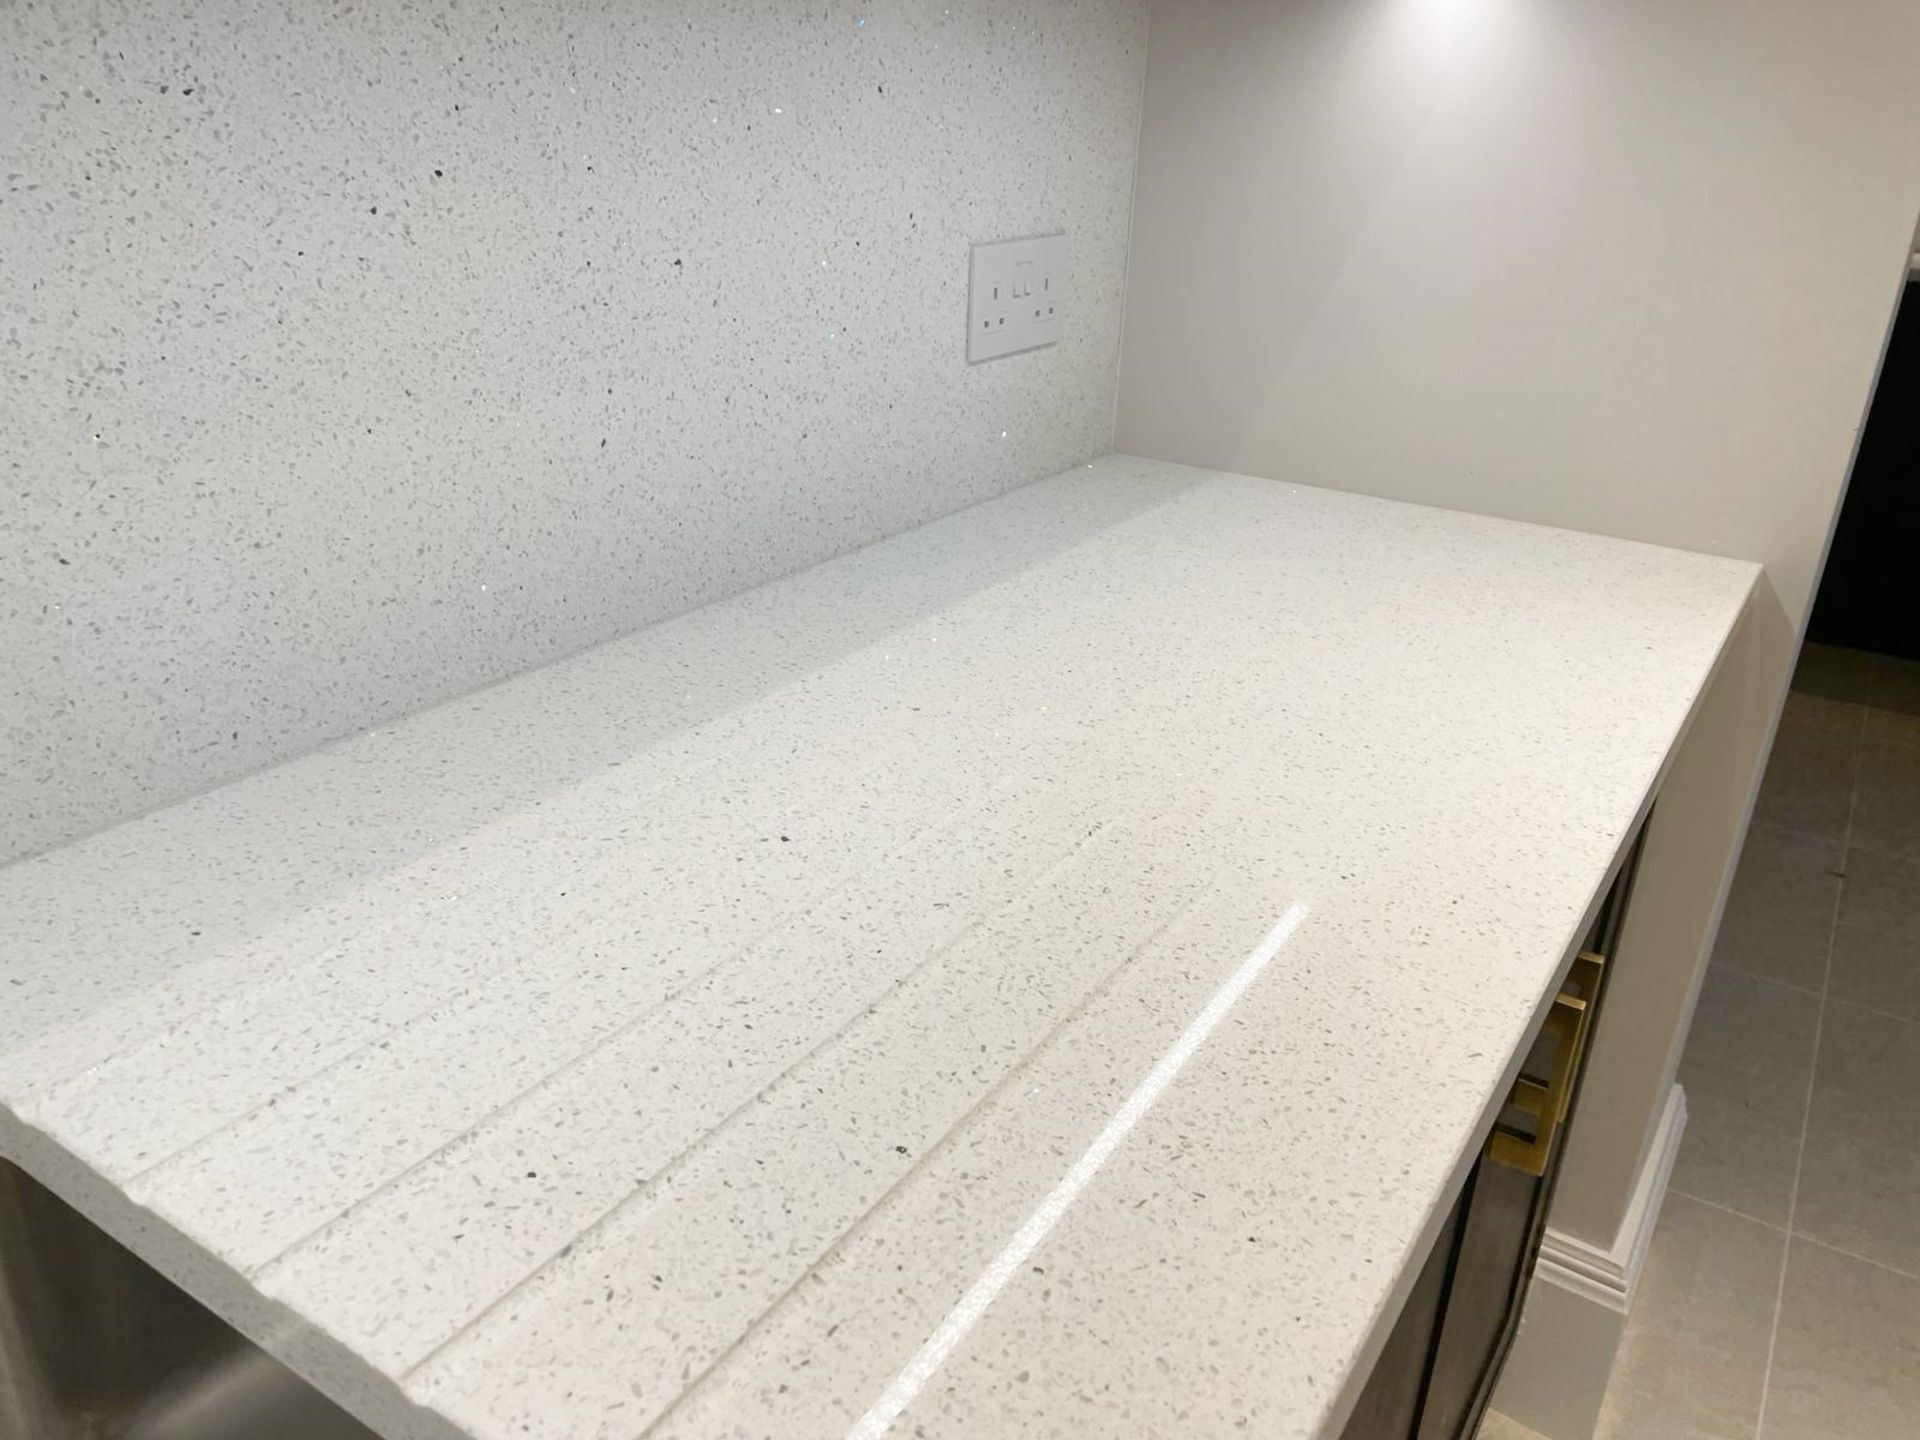 1 x Large Bespoke Fitted Luxury Home Bar with White Terrazzo Quartz Counter Worktops - Image 13 of 38